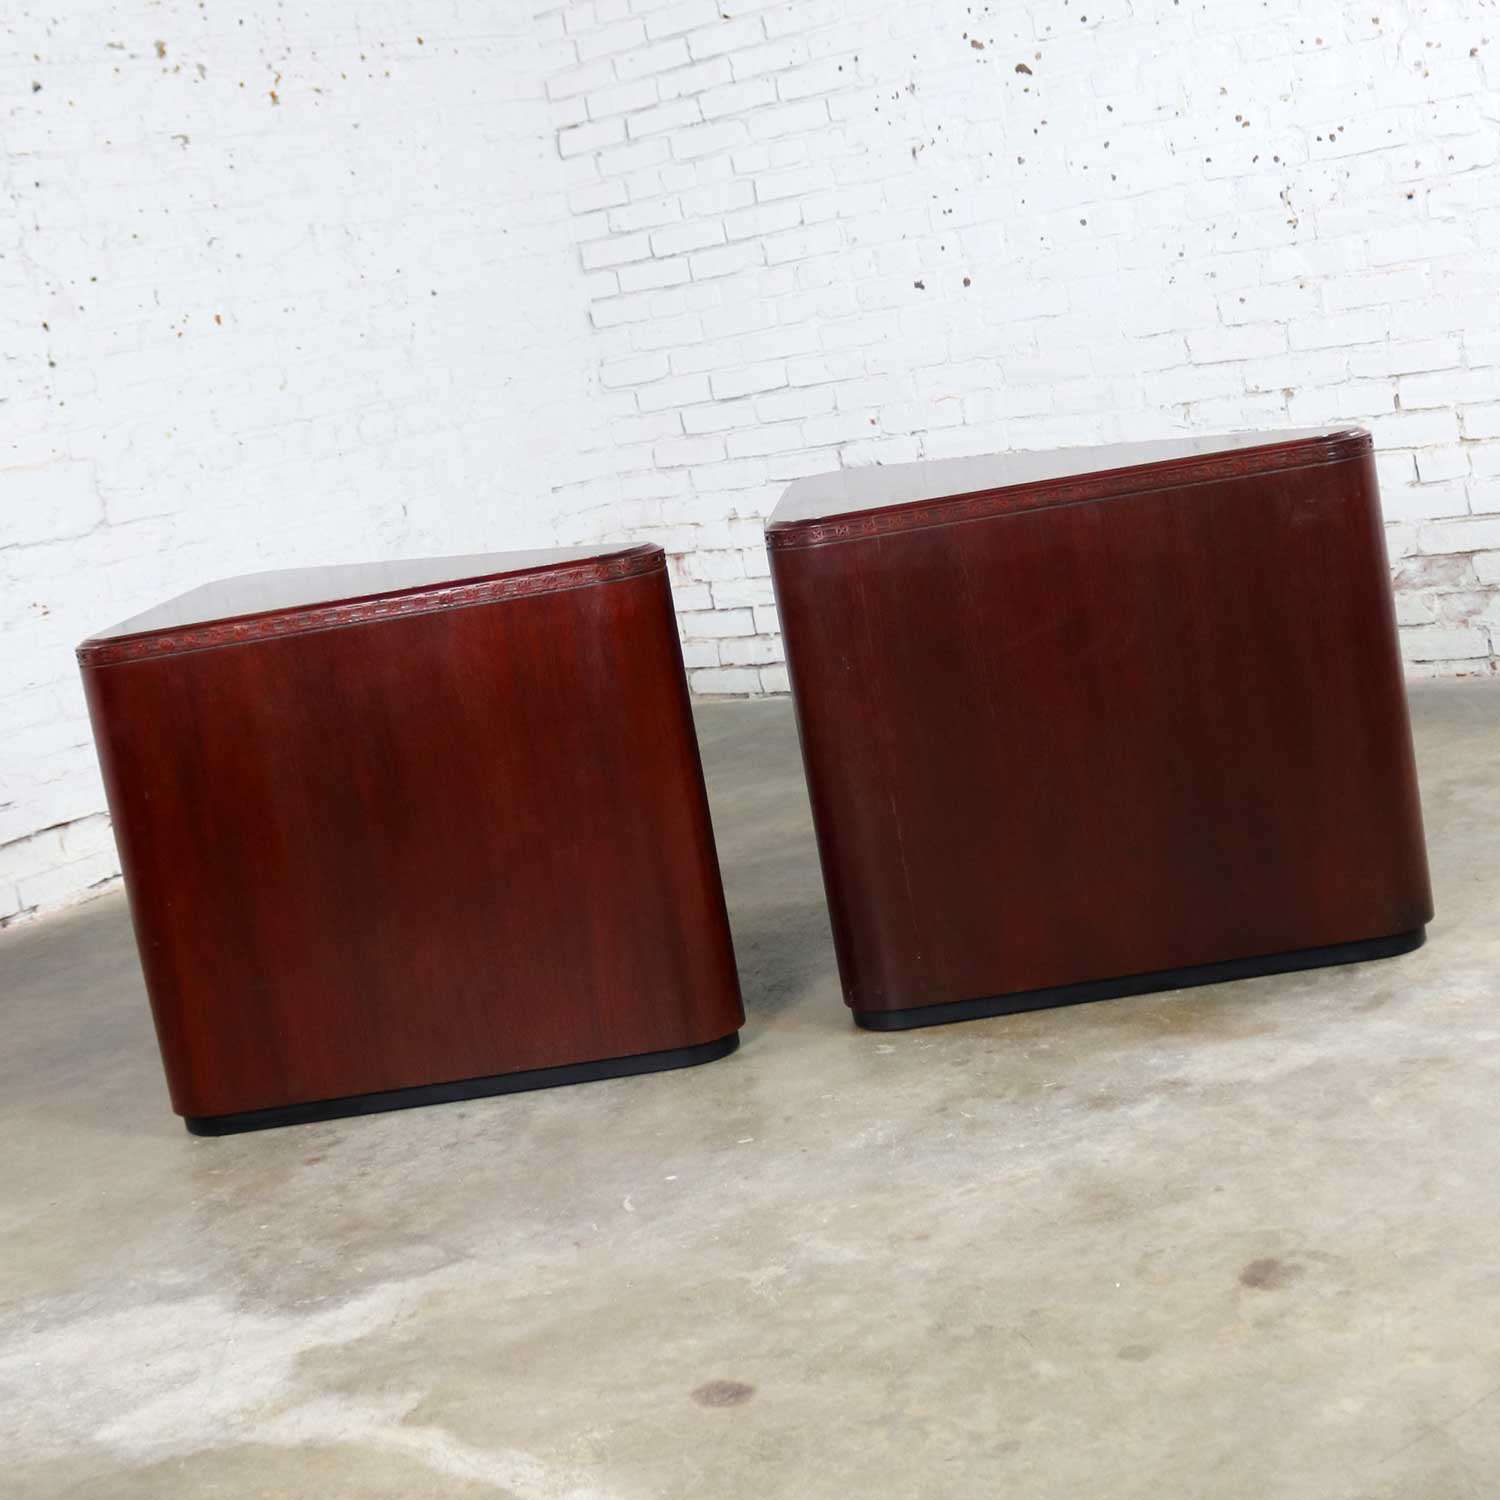 Vintage Pair of Mahogany Triangular End Tables or Pedestals